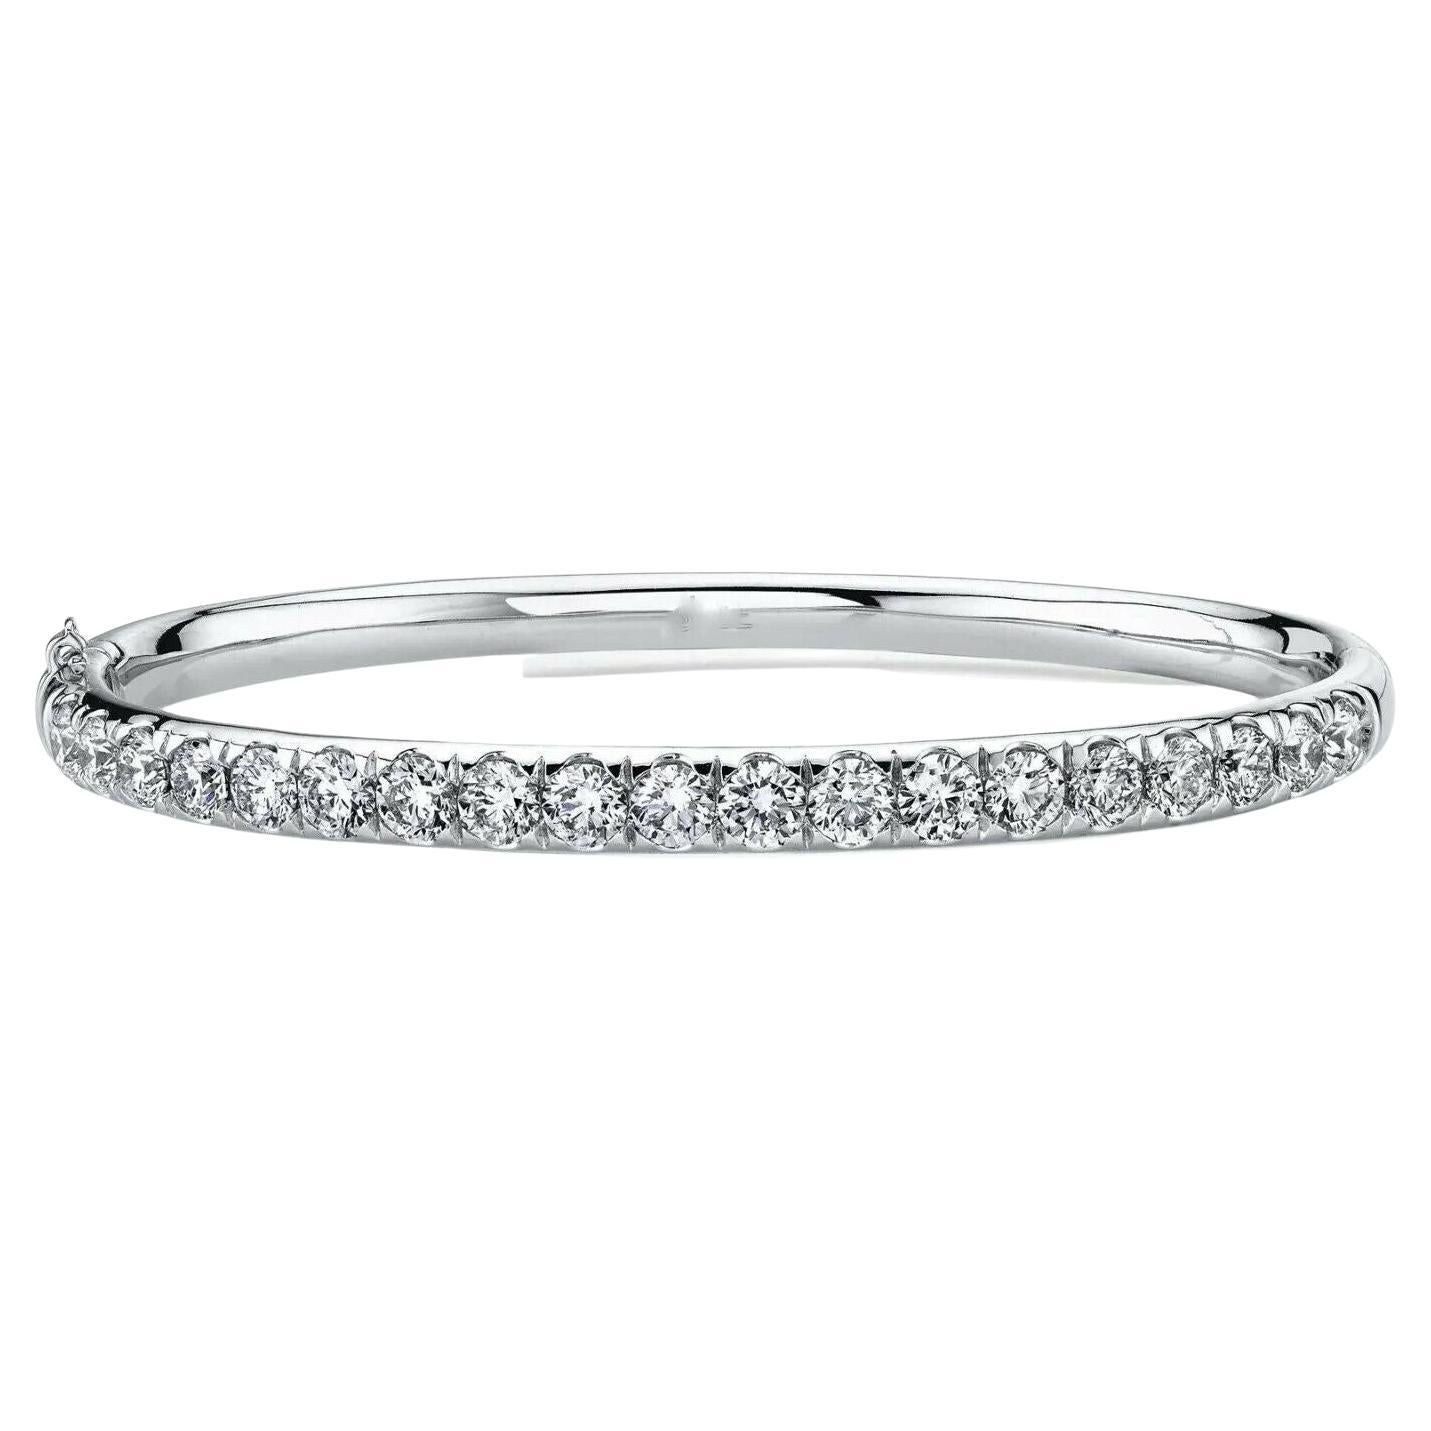 Round Cut Diamond 3.95 Total Carat Weight White Gold Bangle Bracelet For Sale